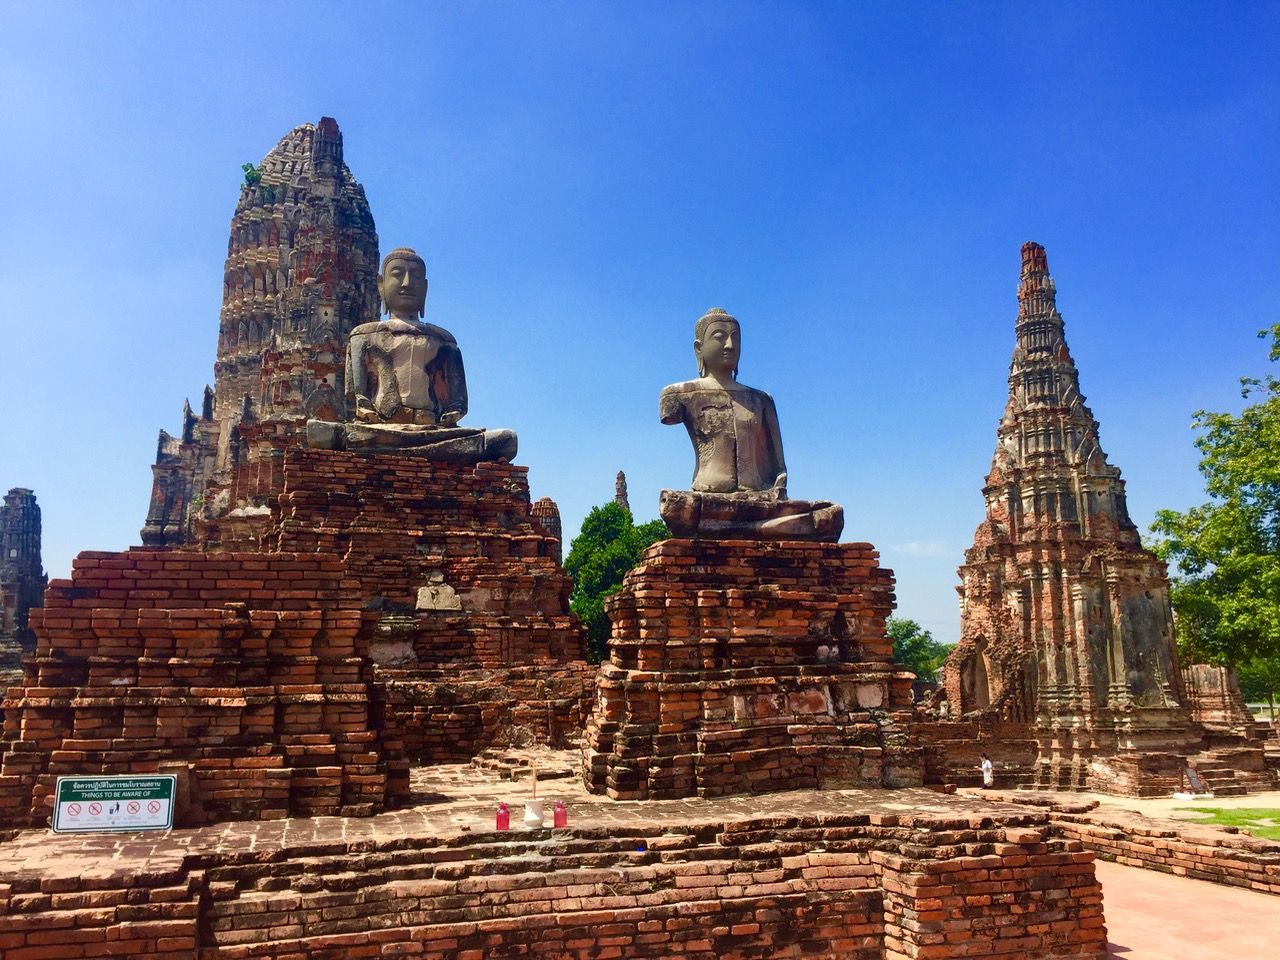 Temple ruins featuring large statues of Buddha.